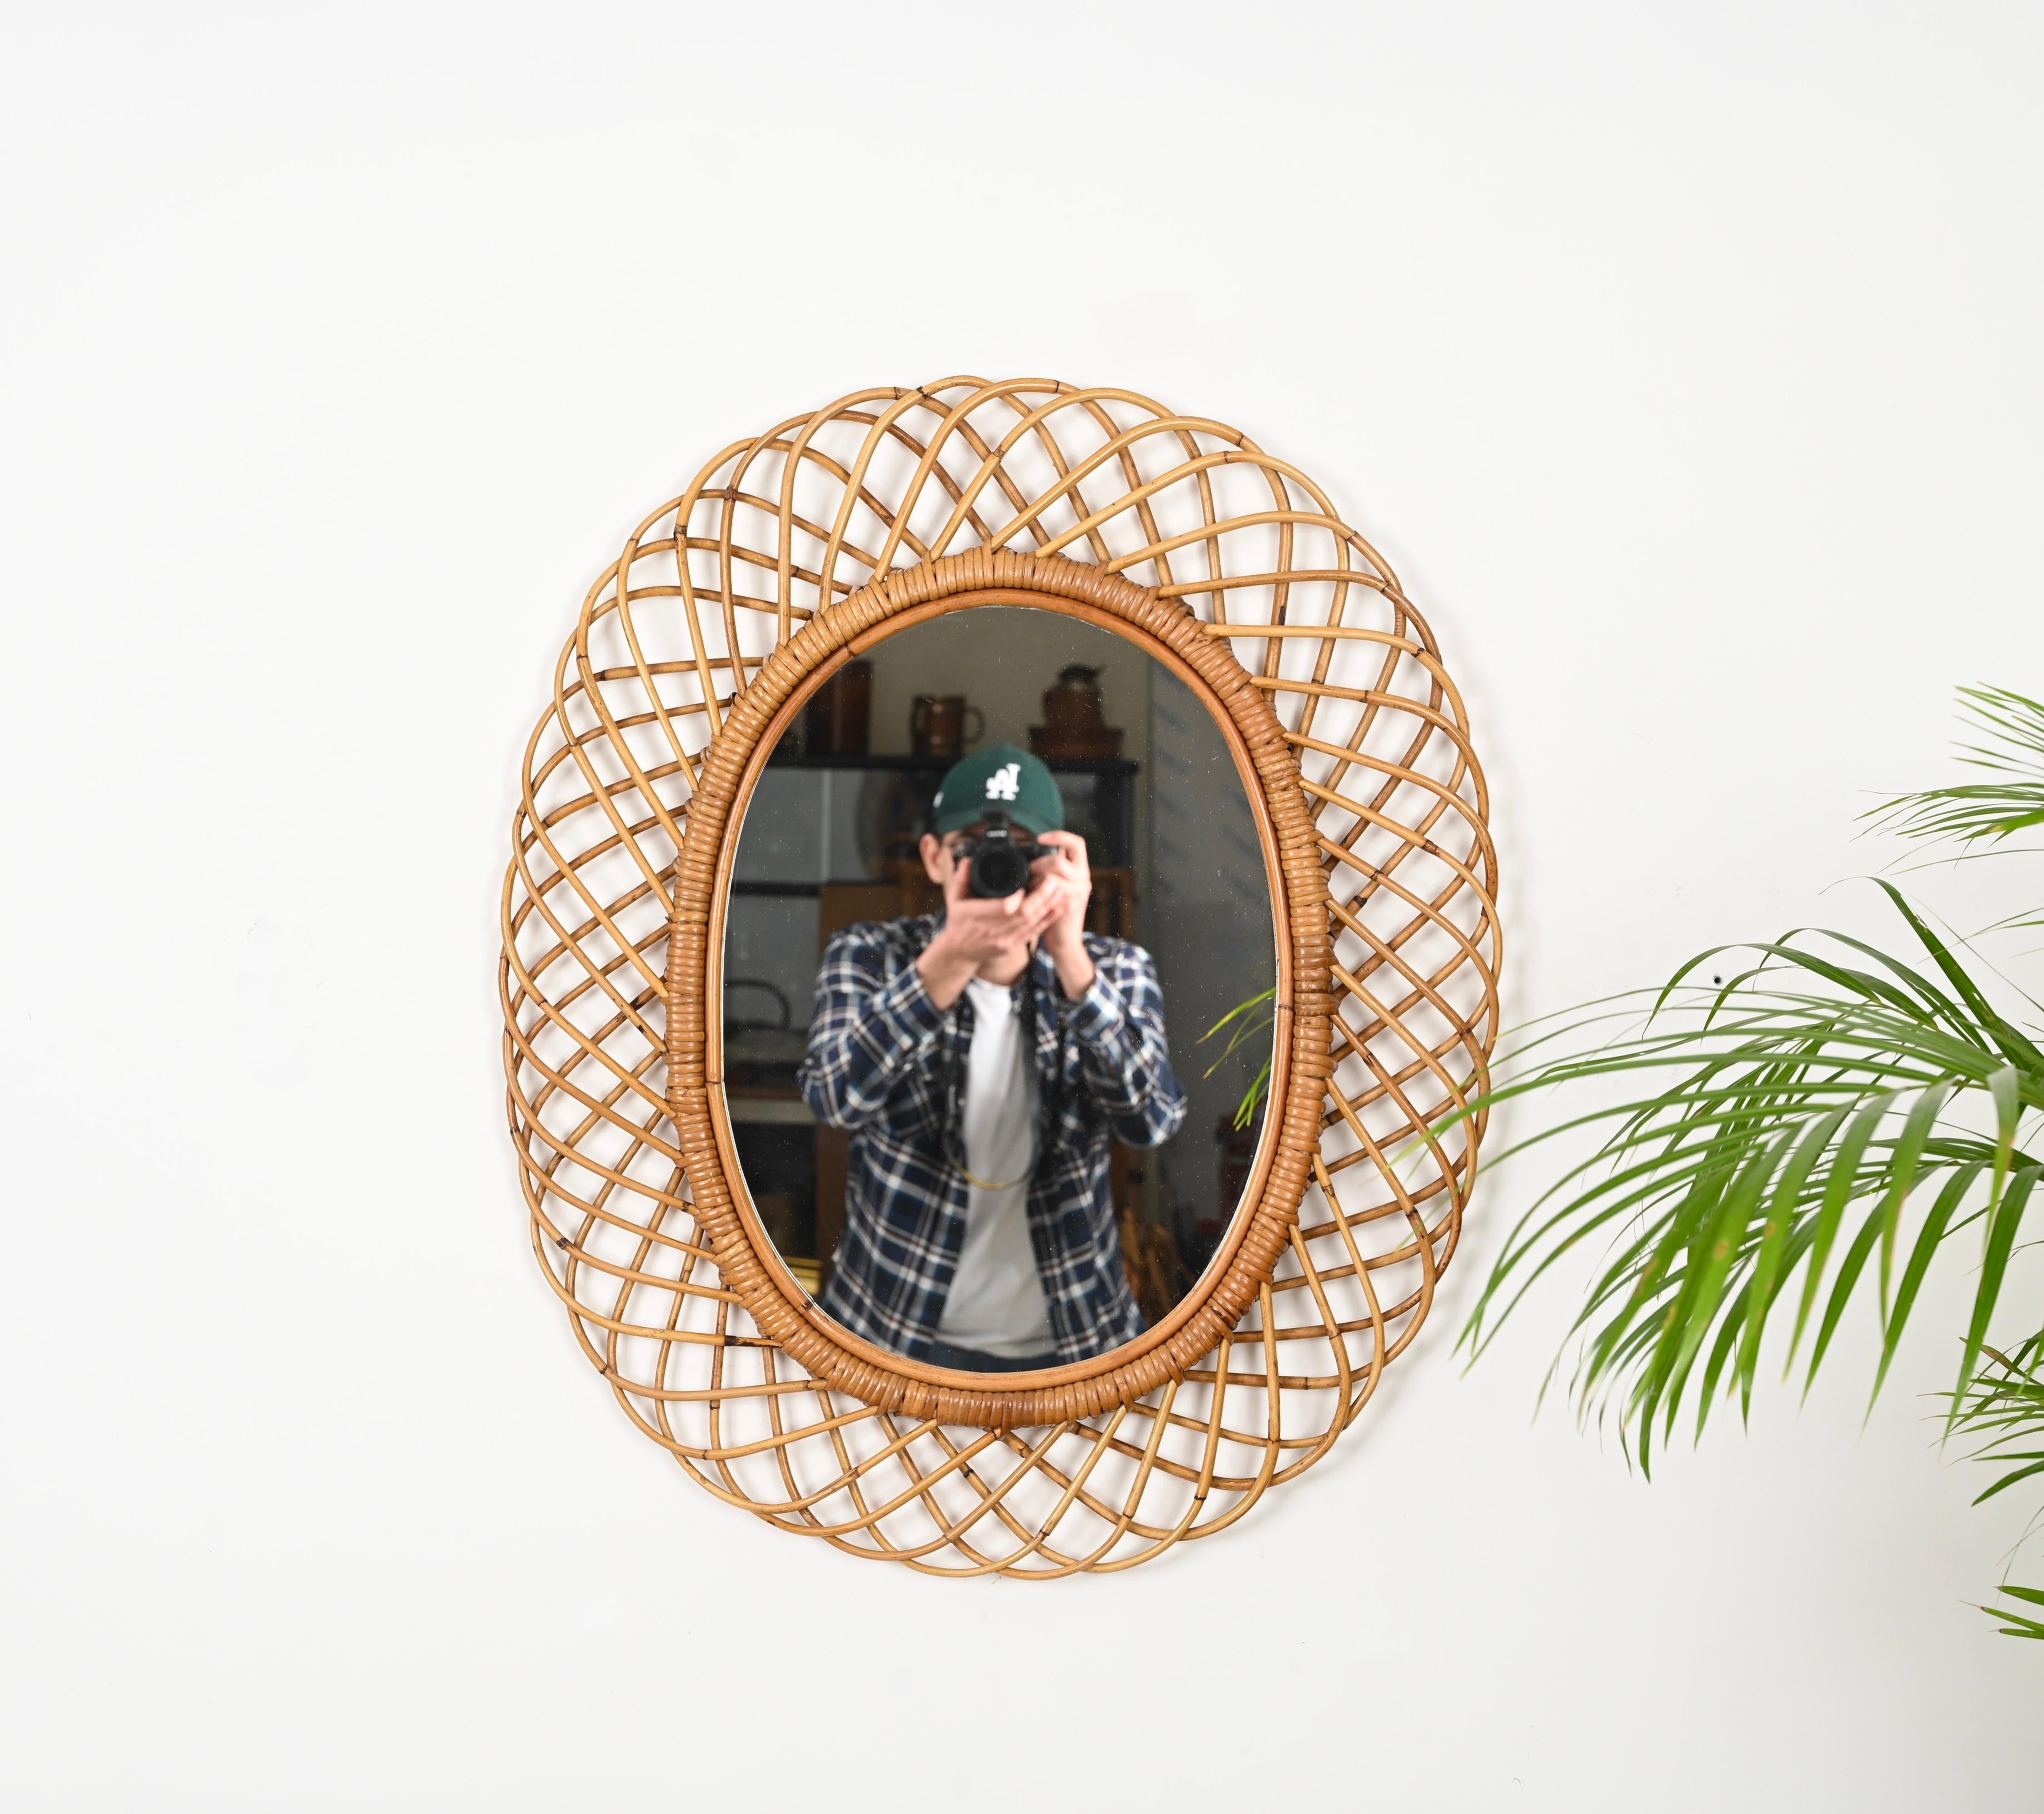 Magnificent large midcentury French Riviera oval mirror in curved rattan, bamboo and wicker. This gorgeous piecewas designed by Franco Albini and was produced in Italy during the 1960s.

This decorative oval mirror is unique as it has a gorgeous